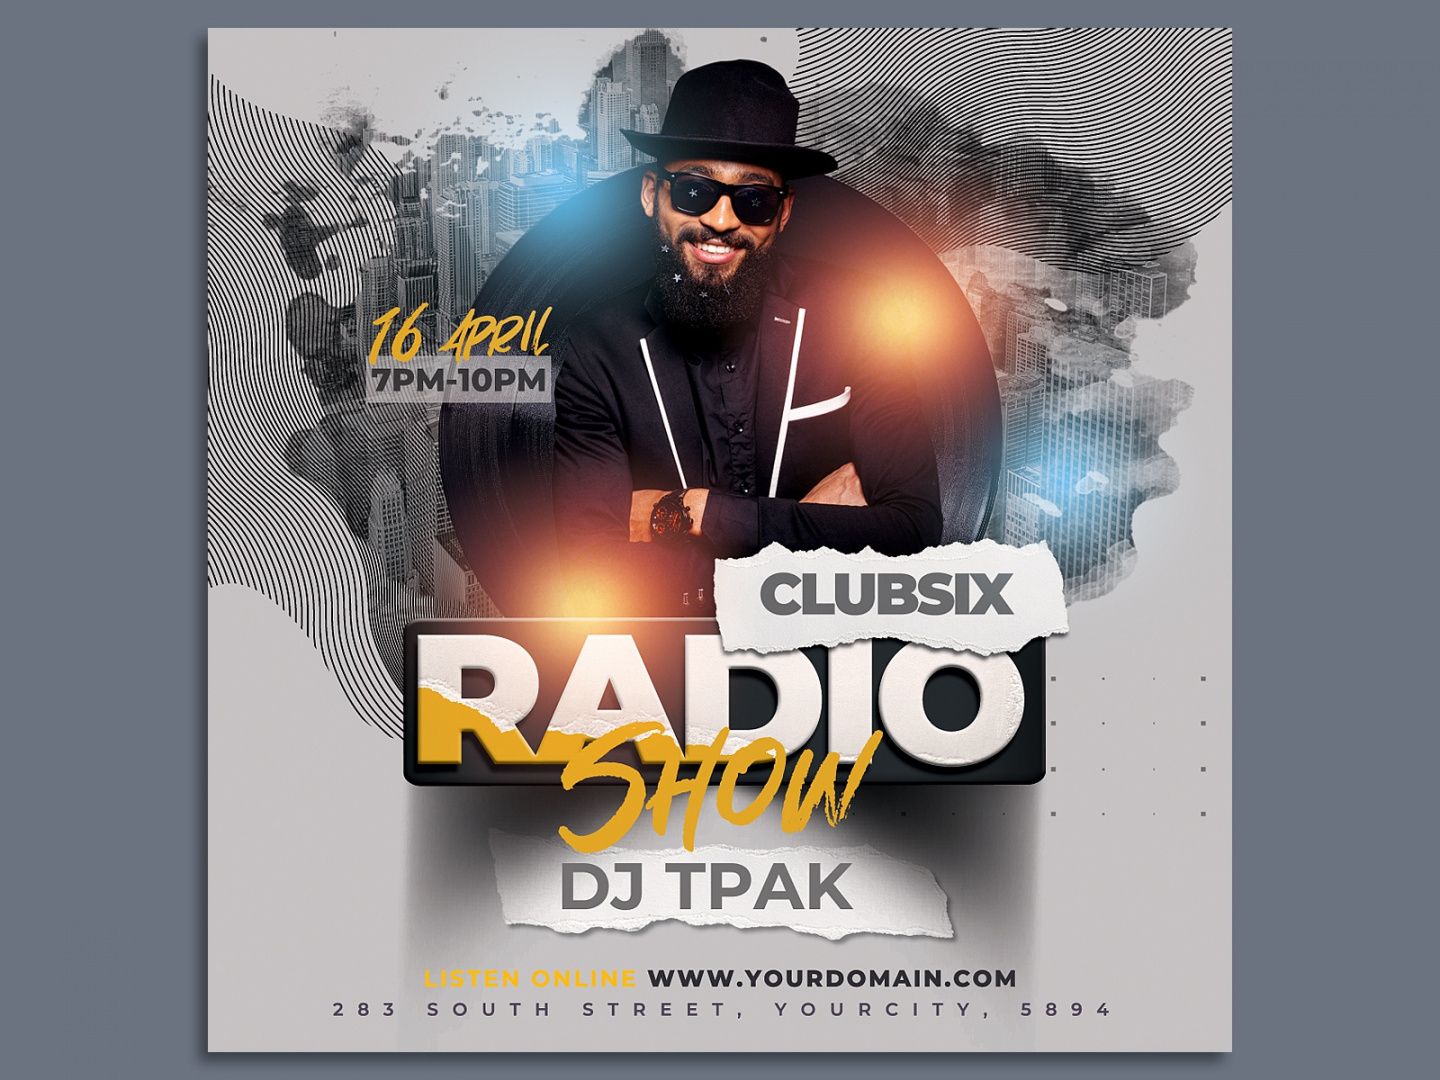 radio show party flyer template by hotpin on dribbble radio show flyer template